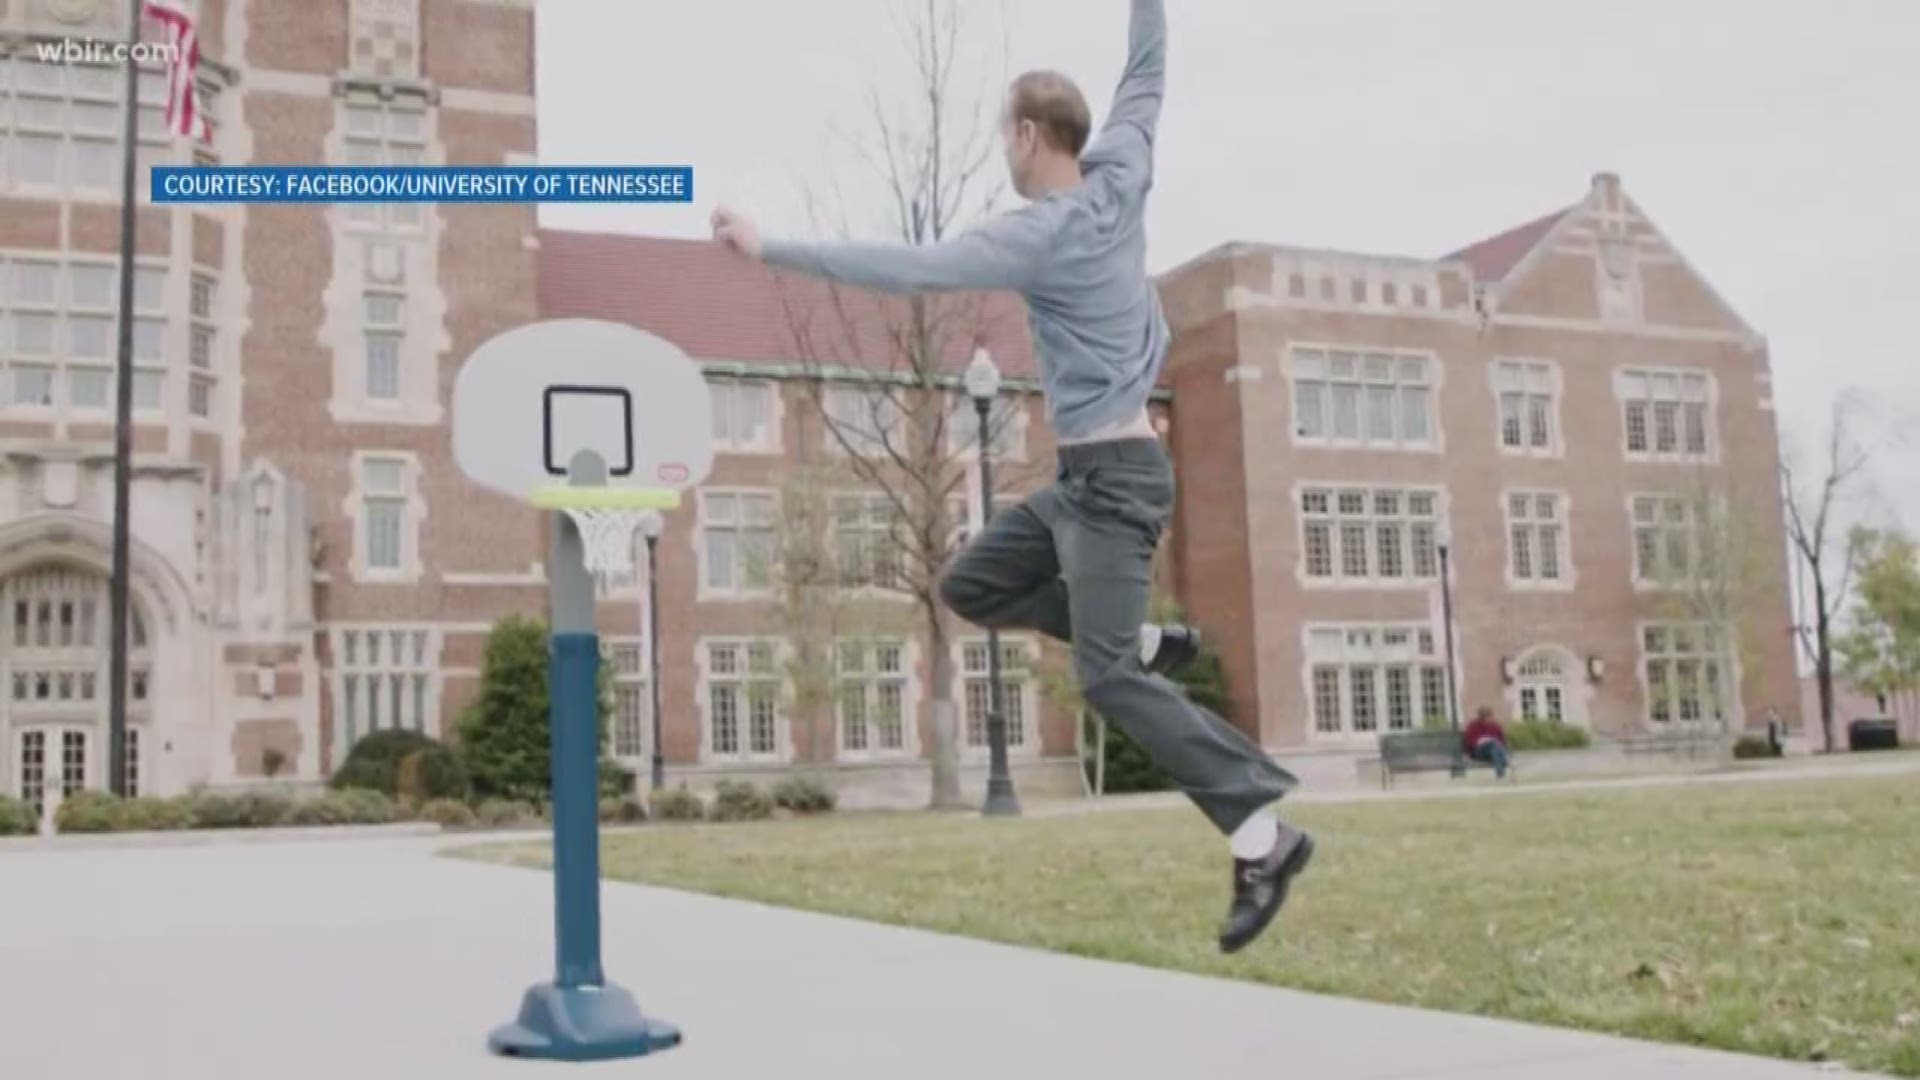 Fans and the 10News team try to emulate the Vols' basketball team dunk tradition "One fly, we all fly."